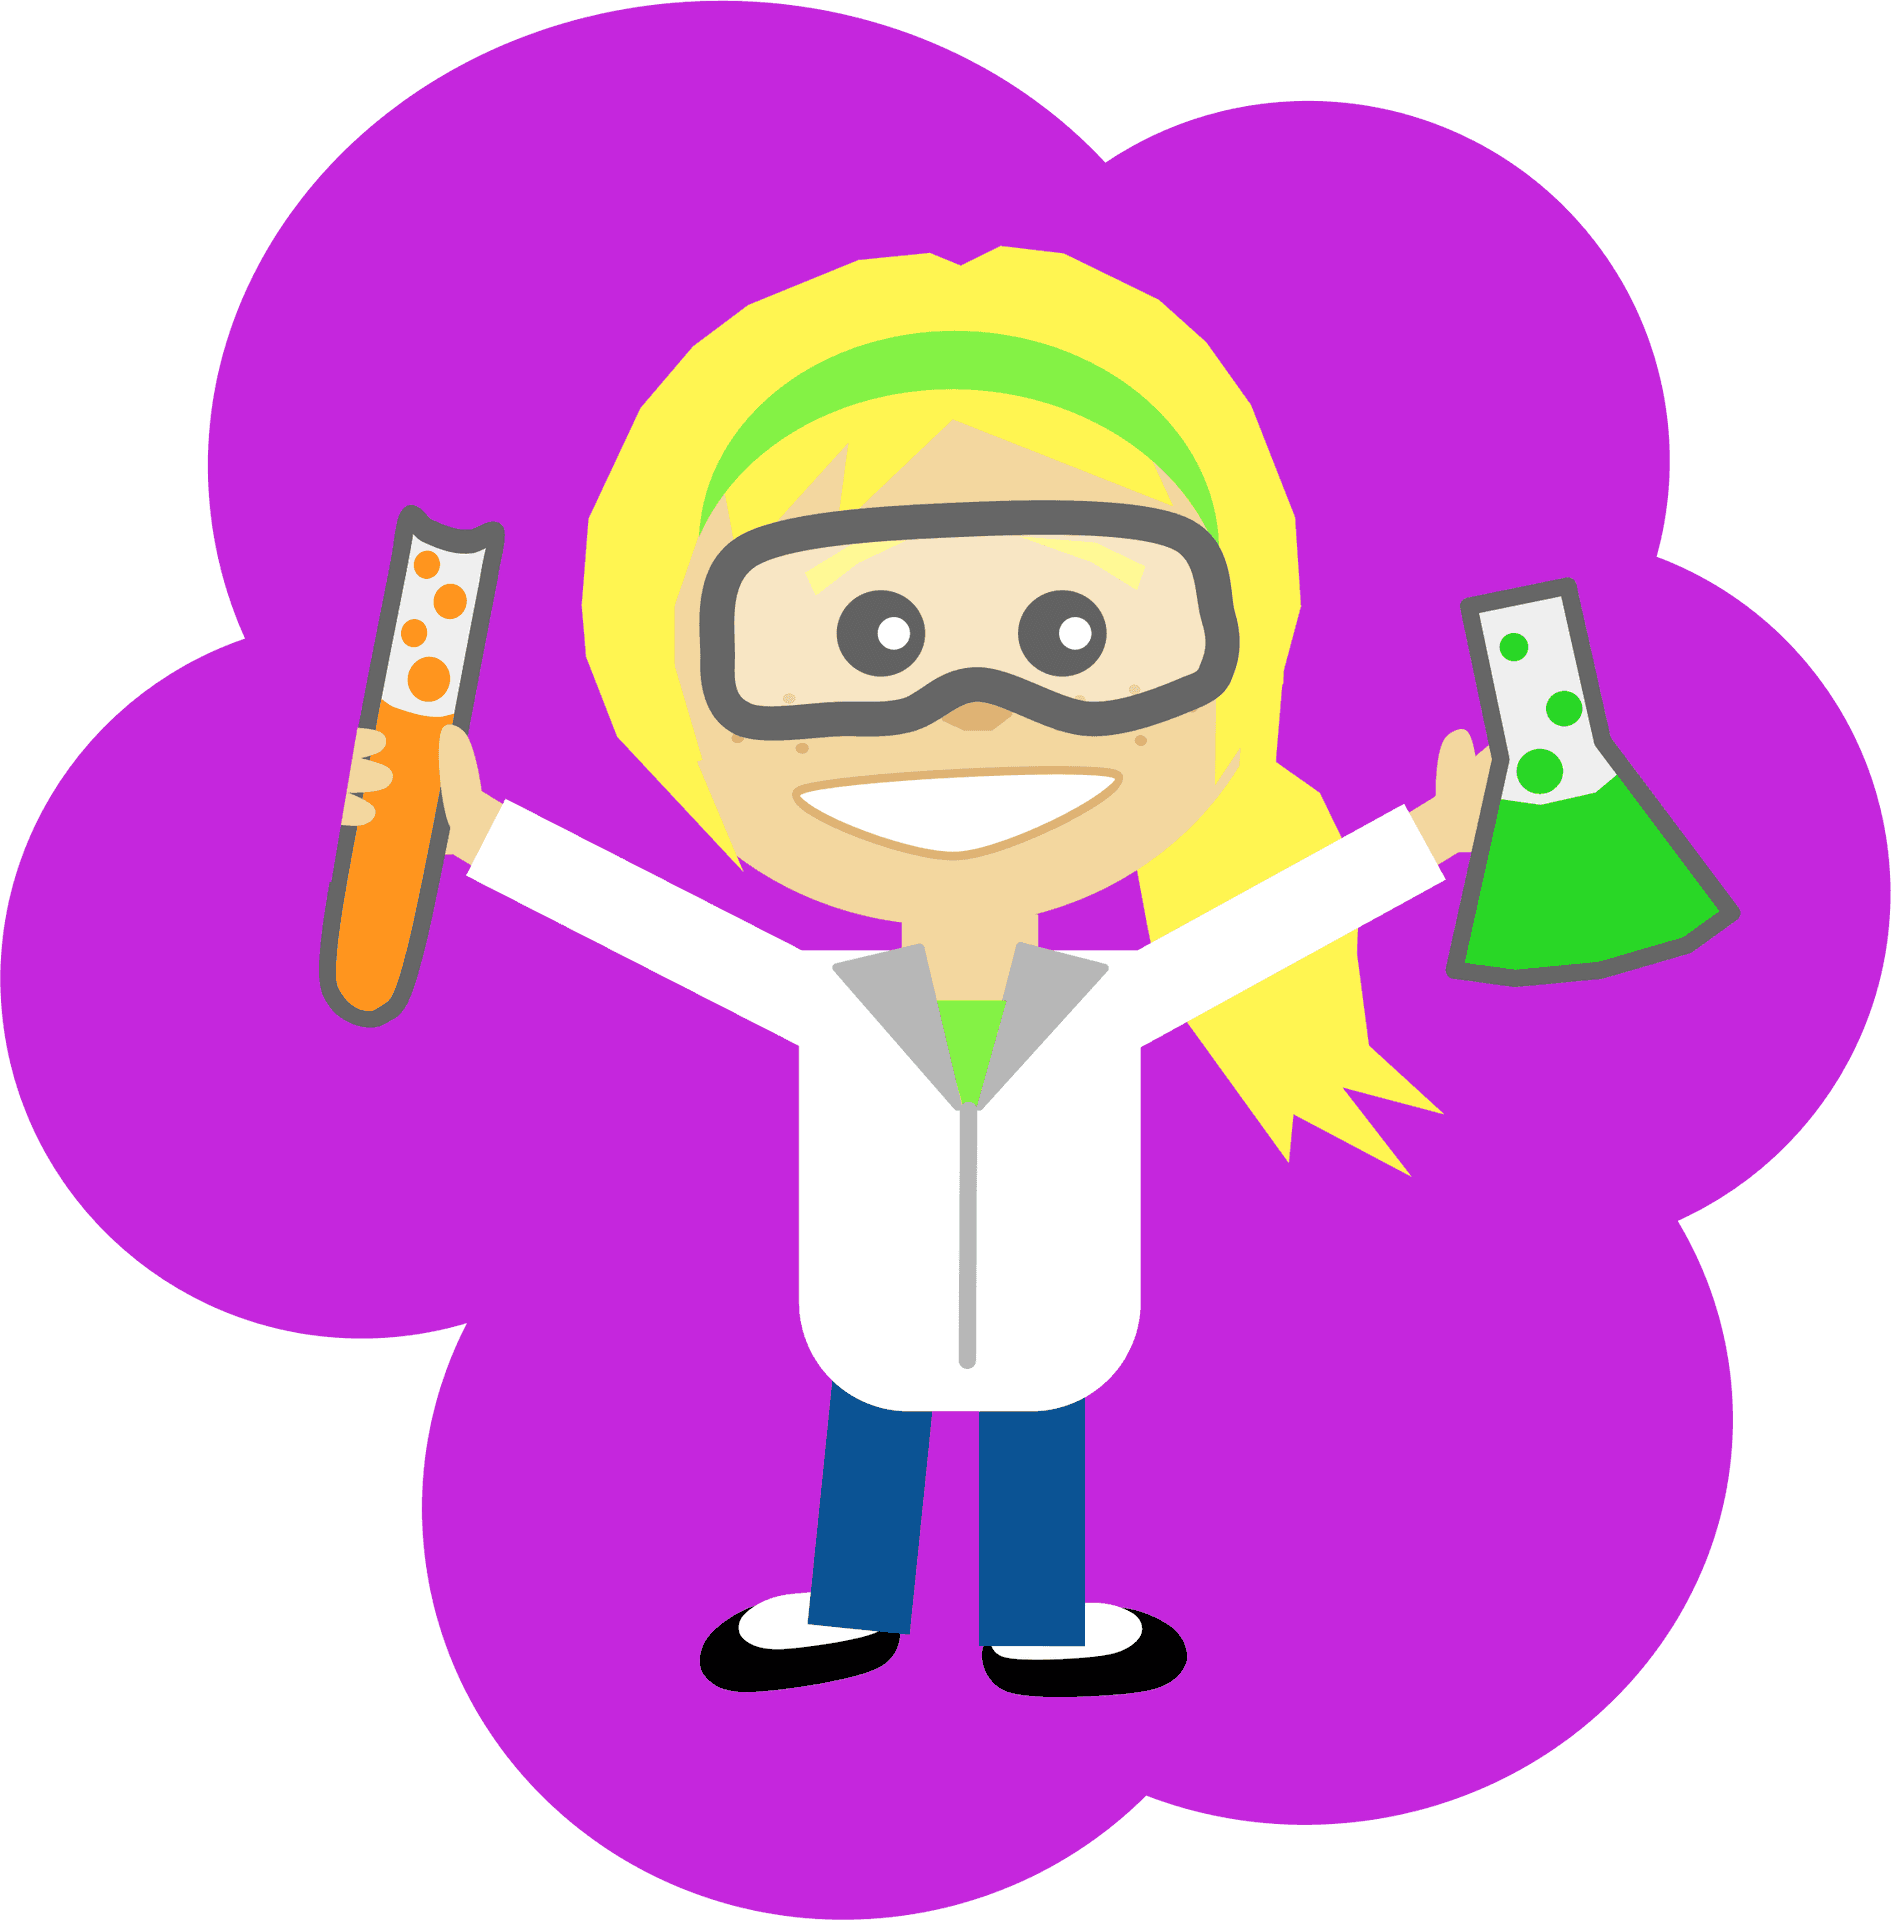 Cartoon Scientist Holding Test Tubes PNG image